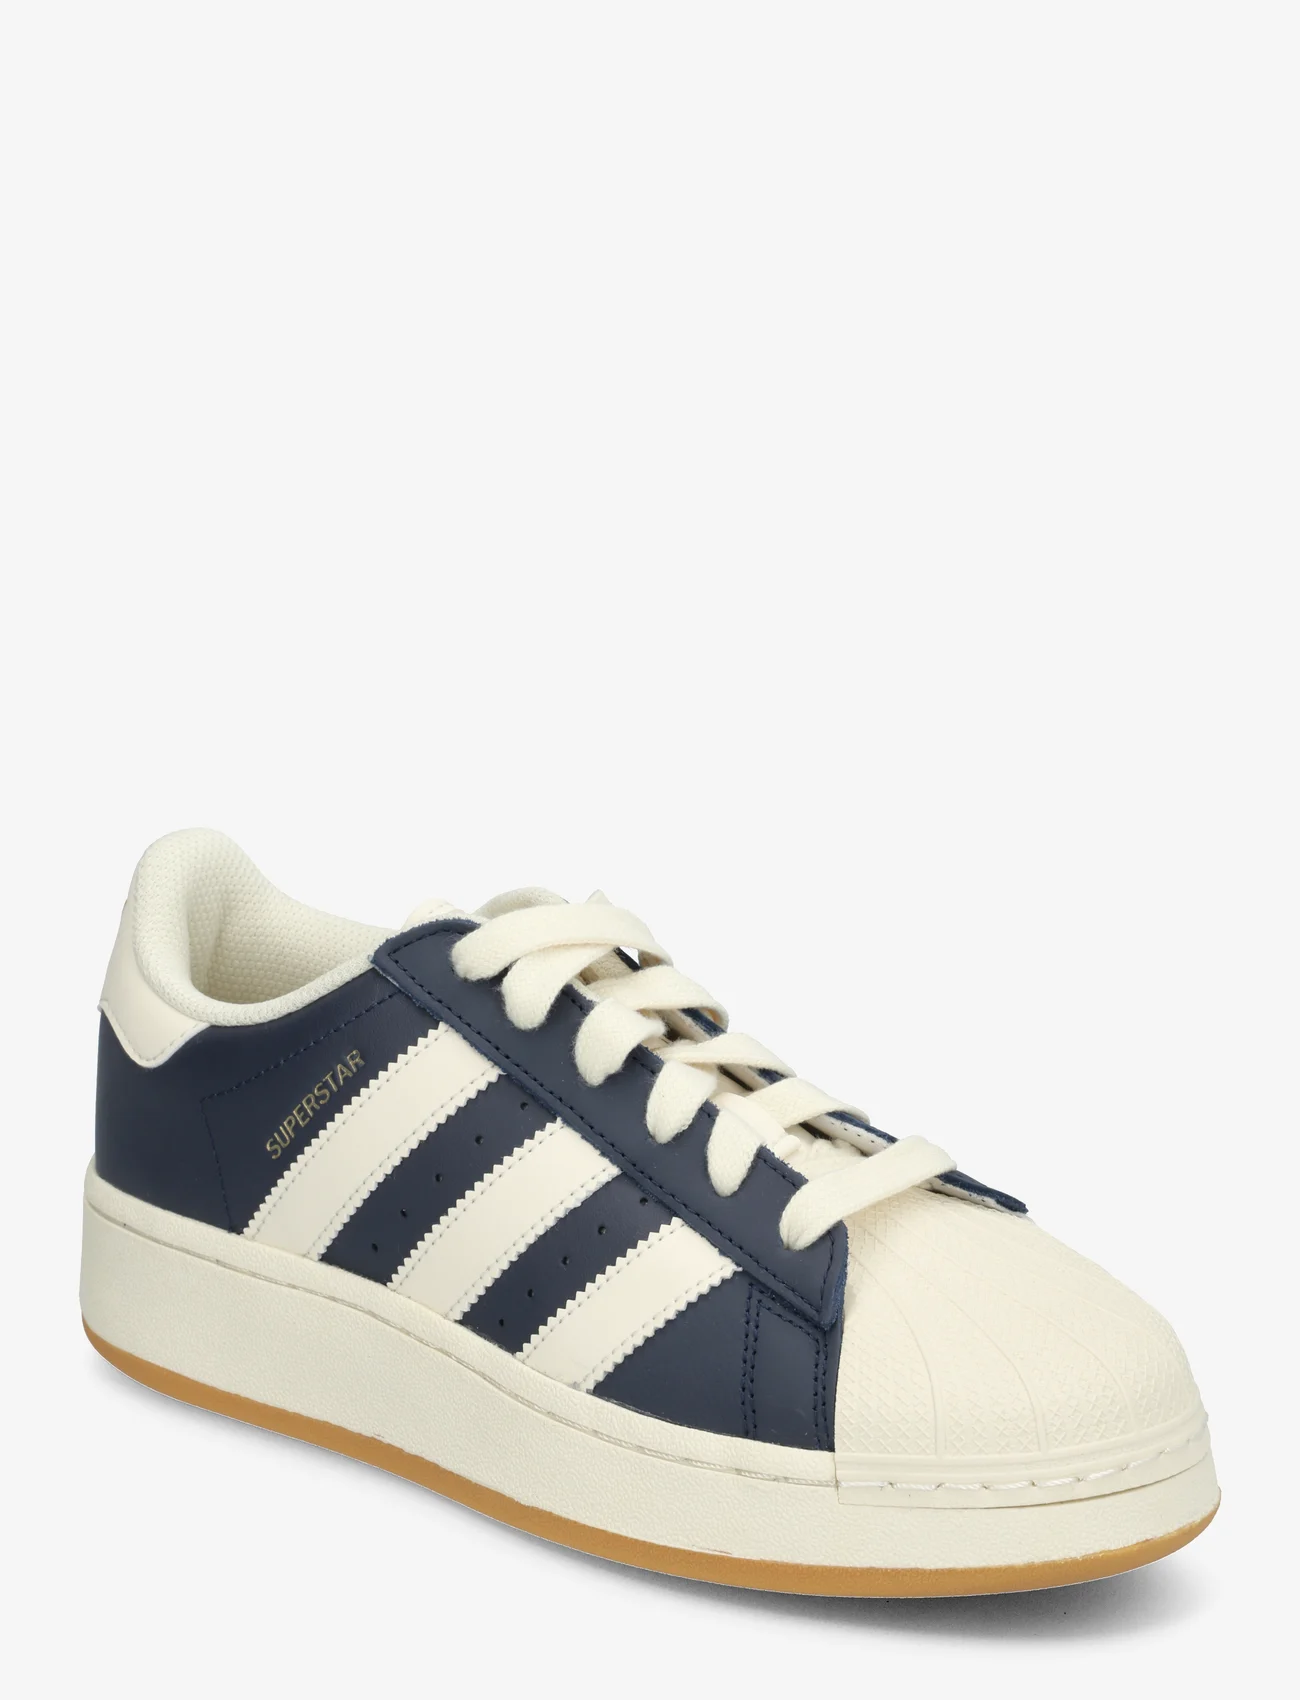 adidas Originals - SUPERSTAR XLG W - lave sneakers - nindig/cwhite/gum1 - 0